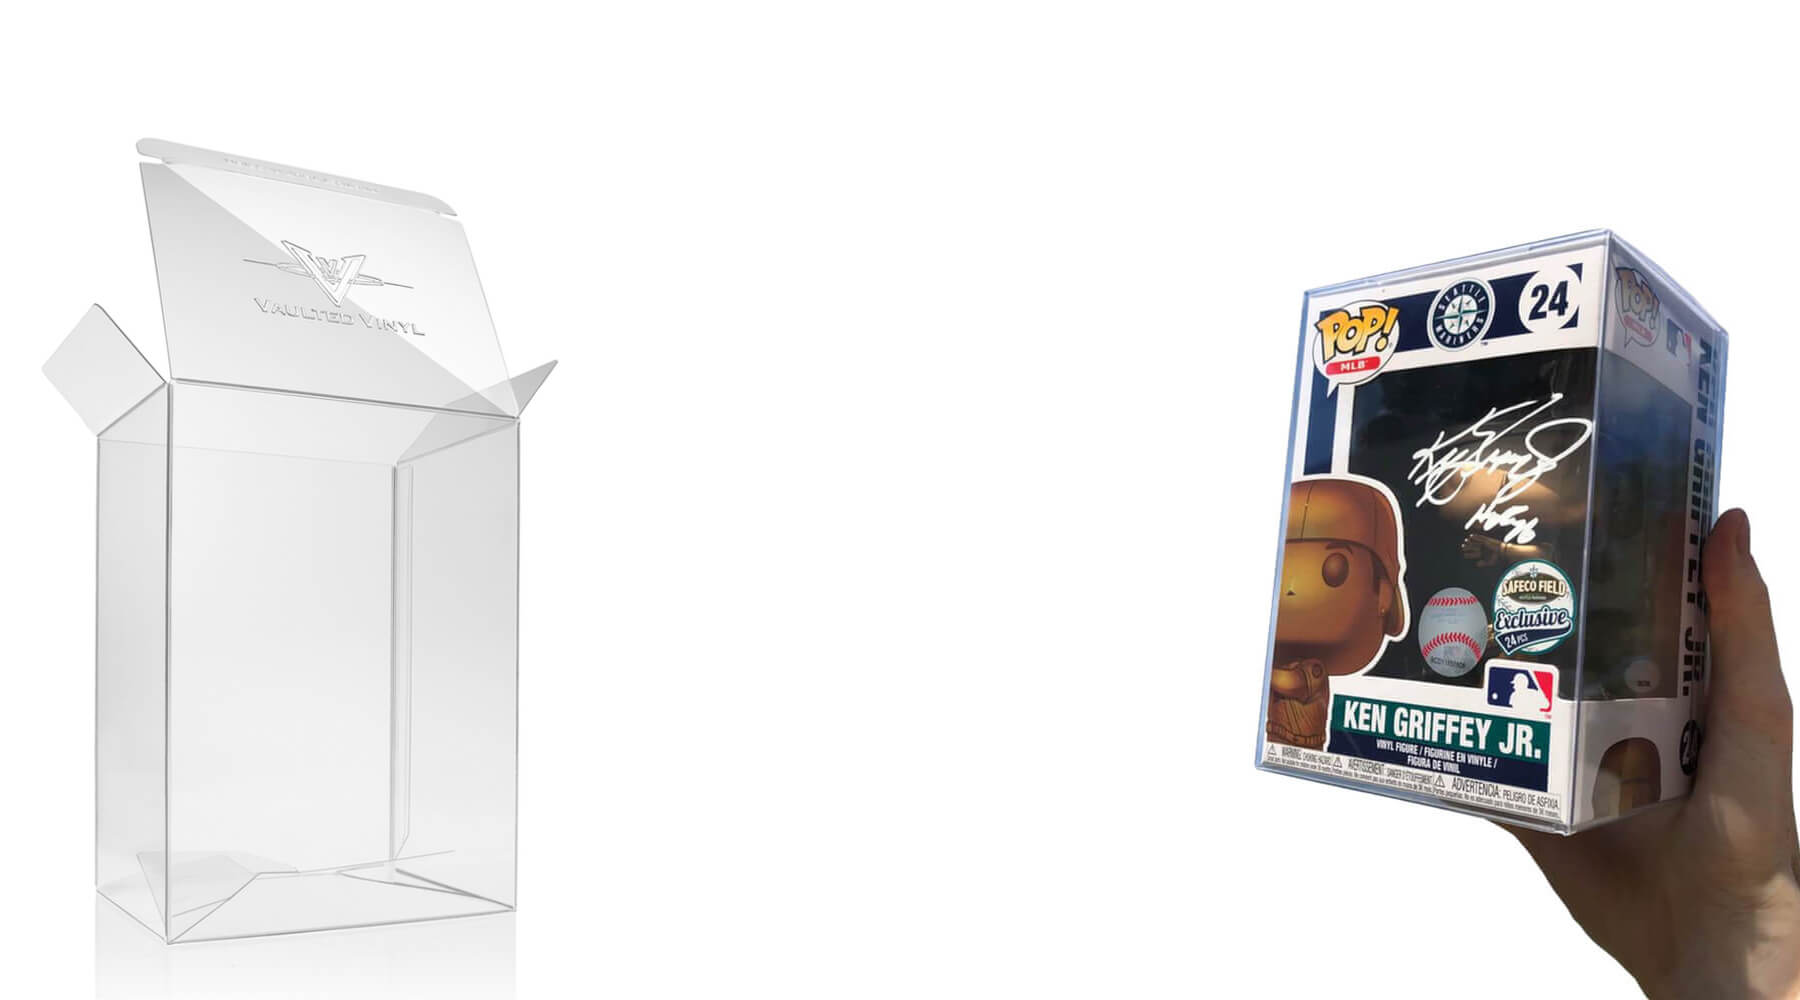 Vaulted Vinyl Funko Pop Protectors. The Collector's brand. Join the movement. 